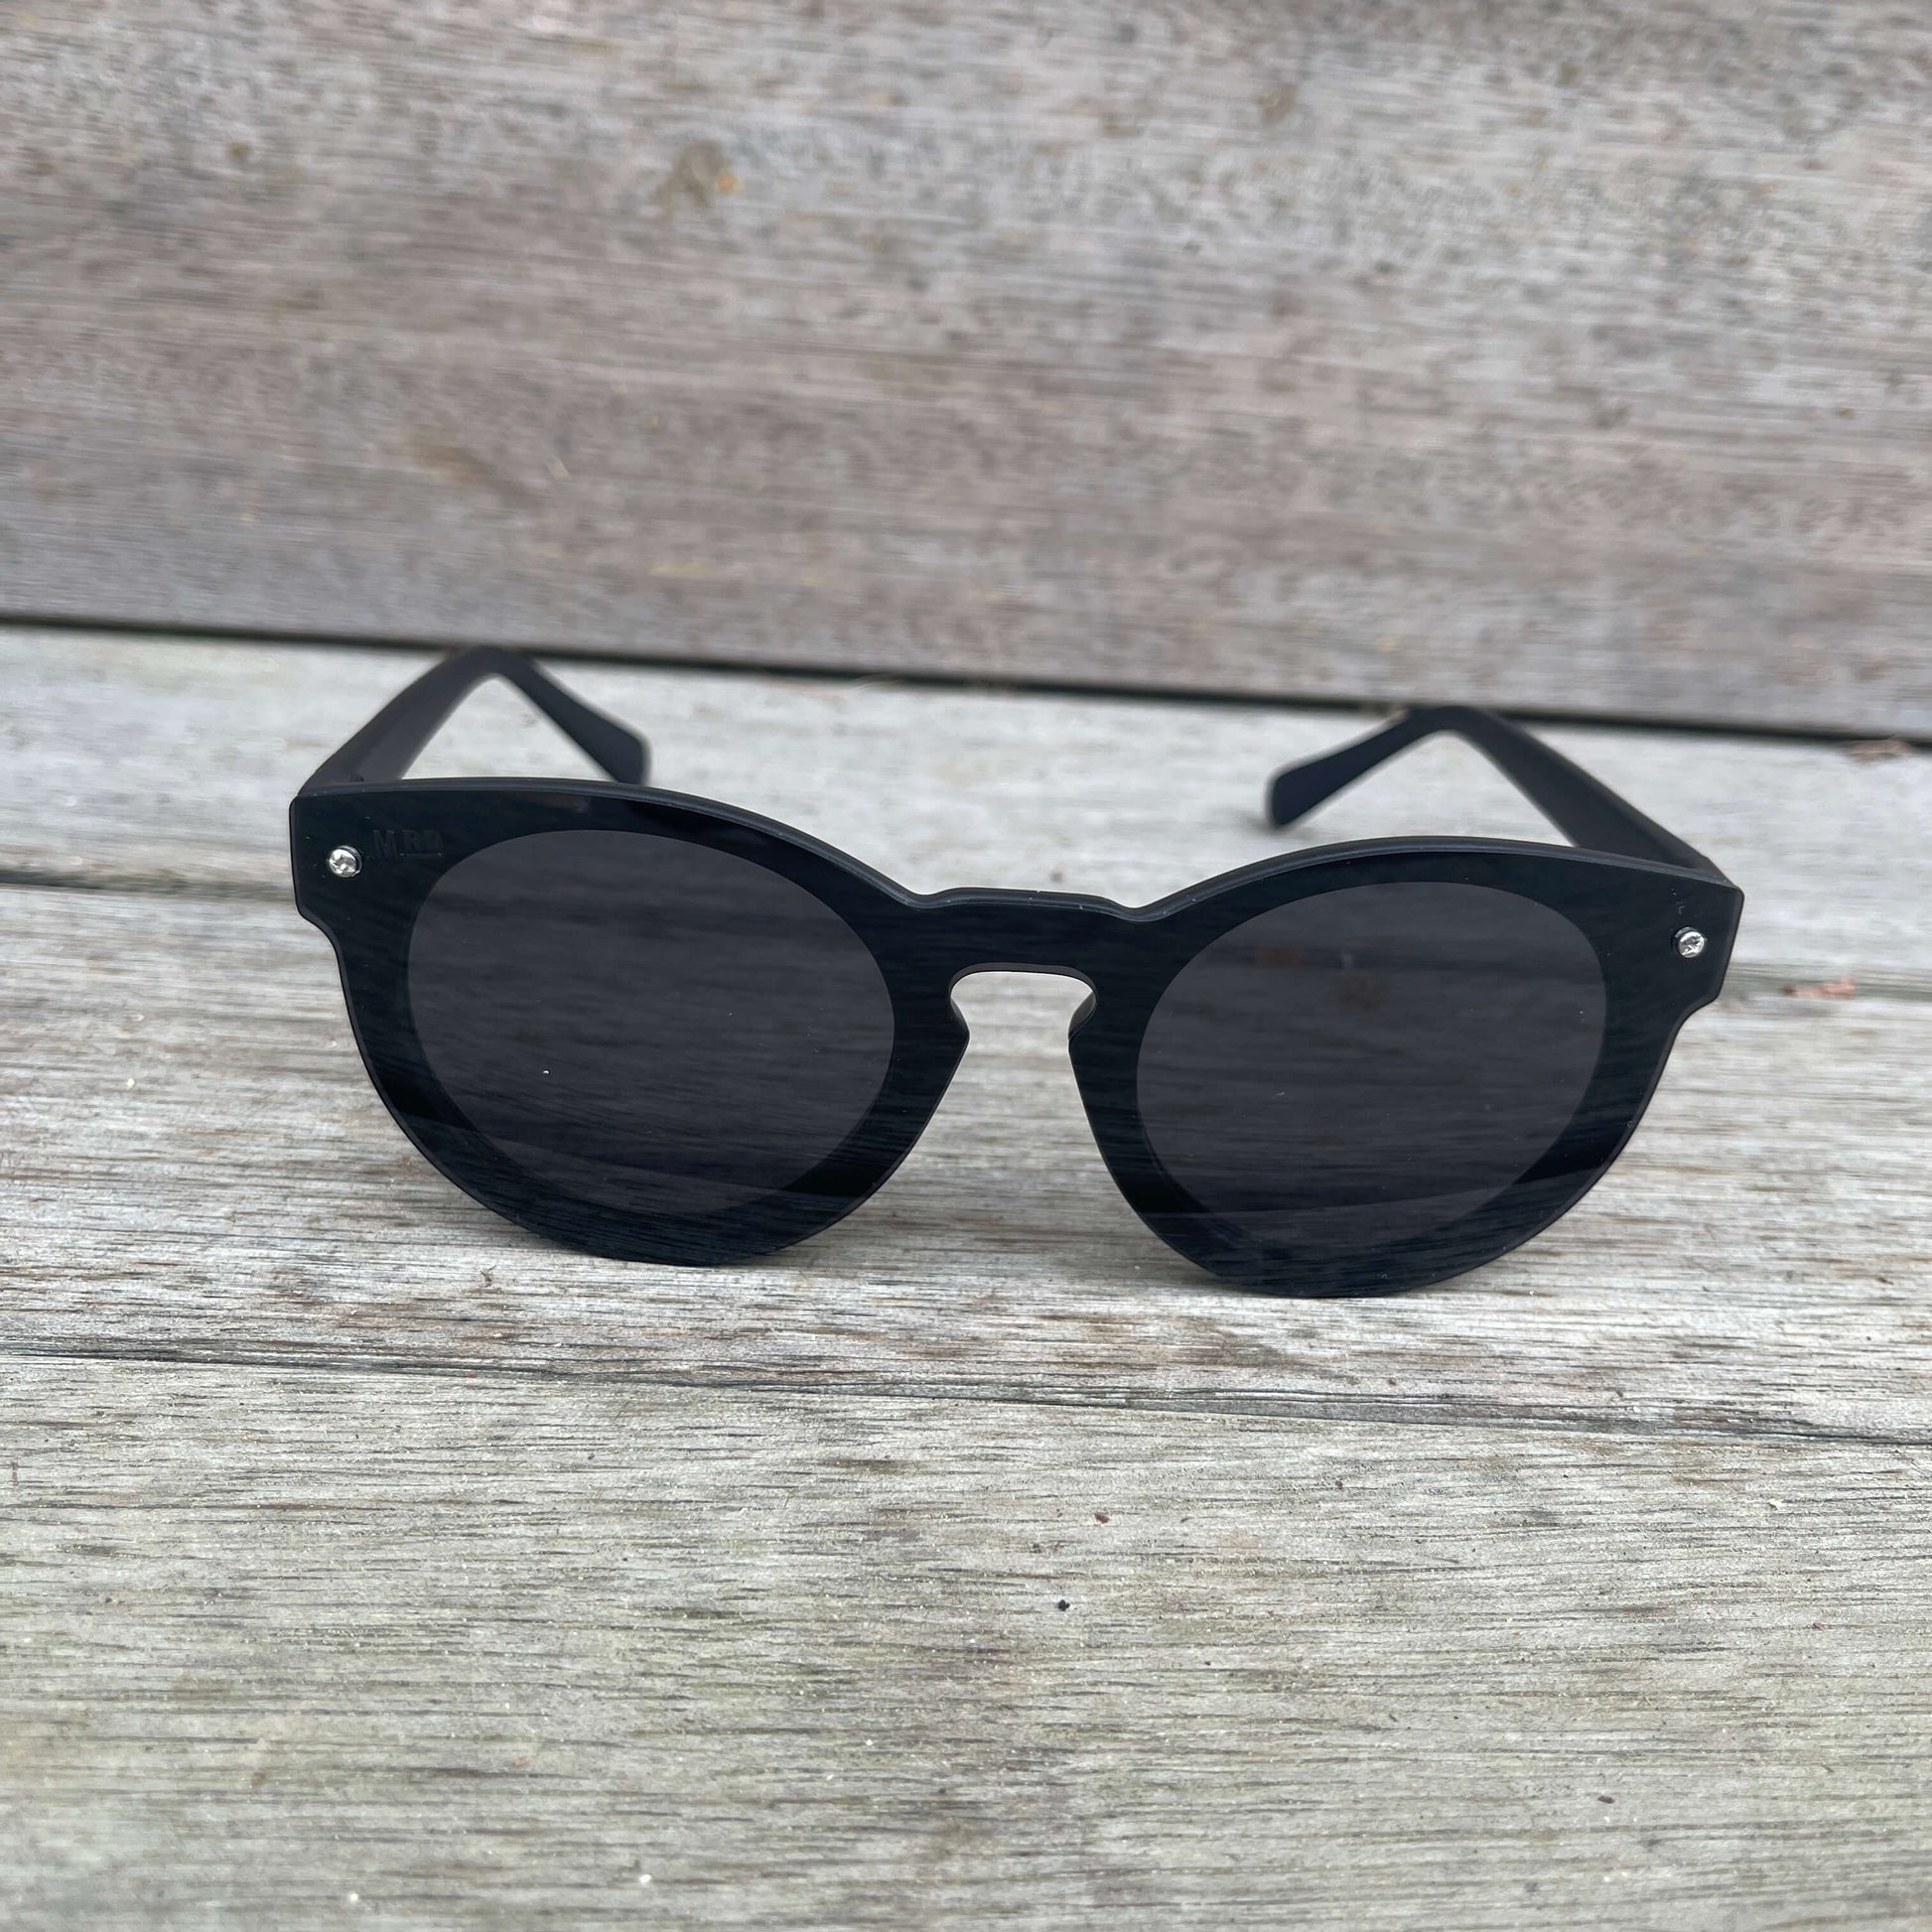 Womens sunglasses in Marilyn Monroe style with black frames.